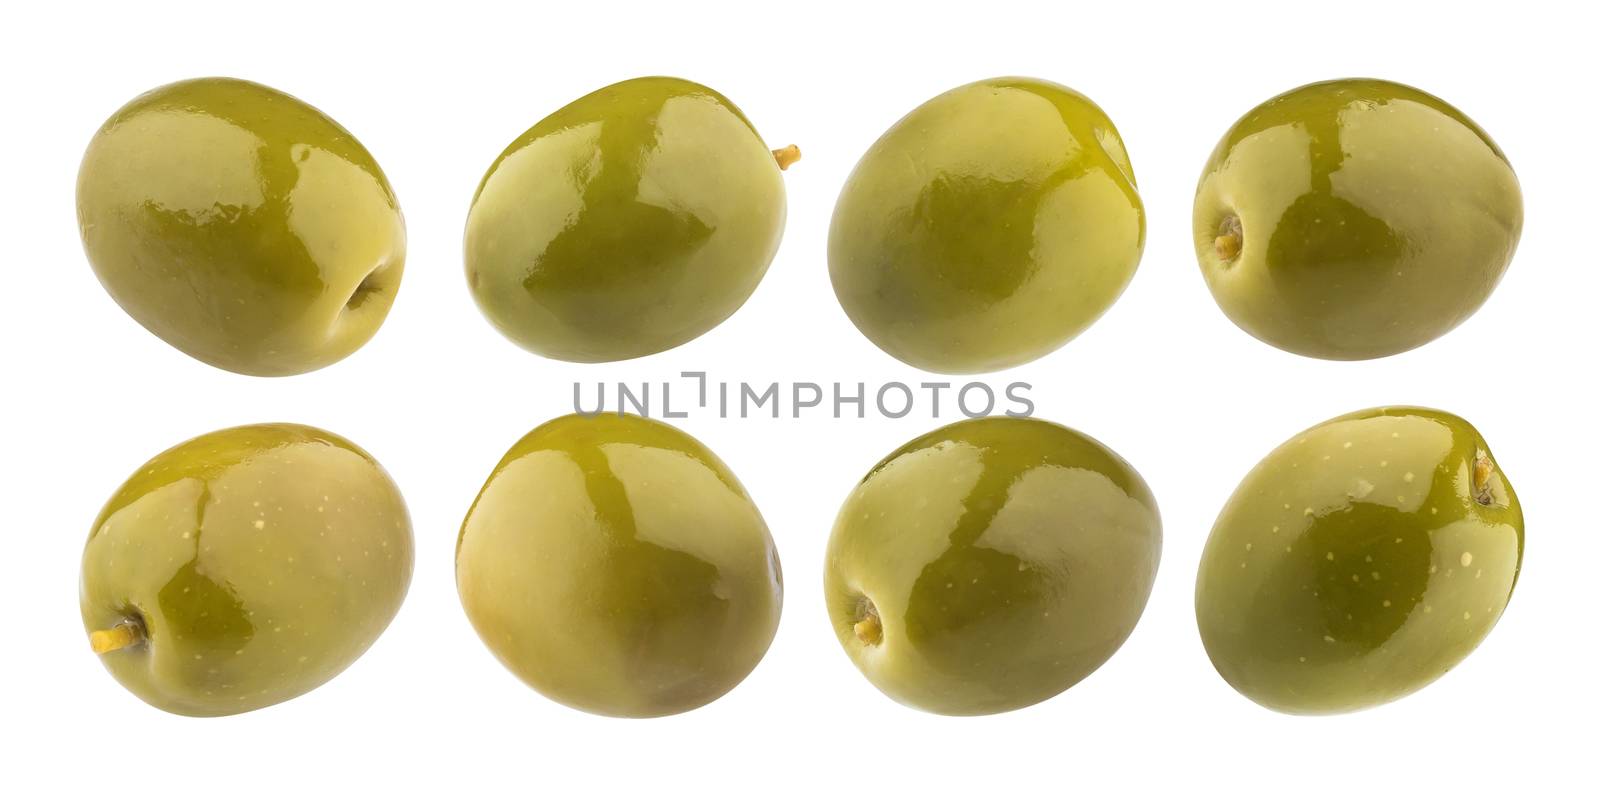 Green olives isolated on white background with clipping path by xamtiw